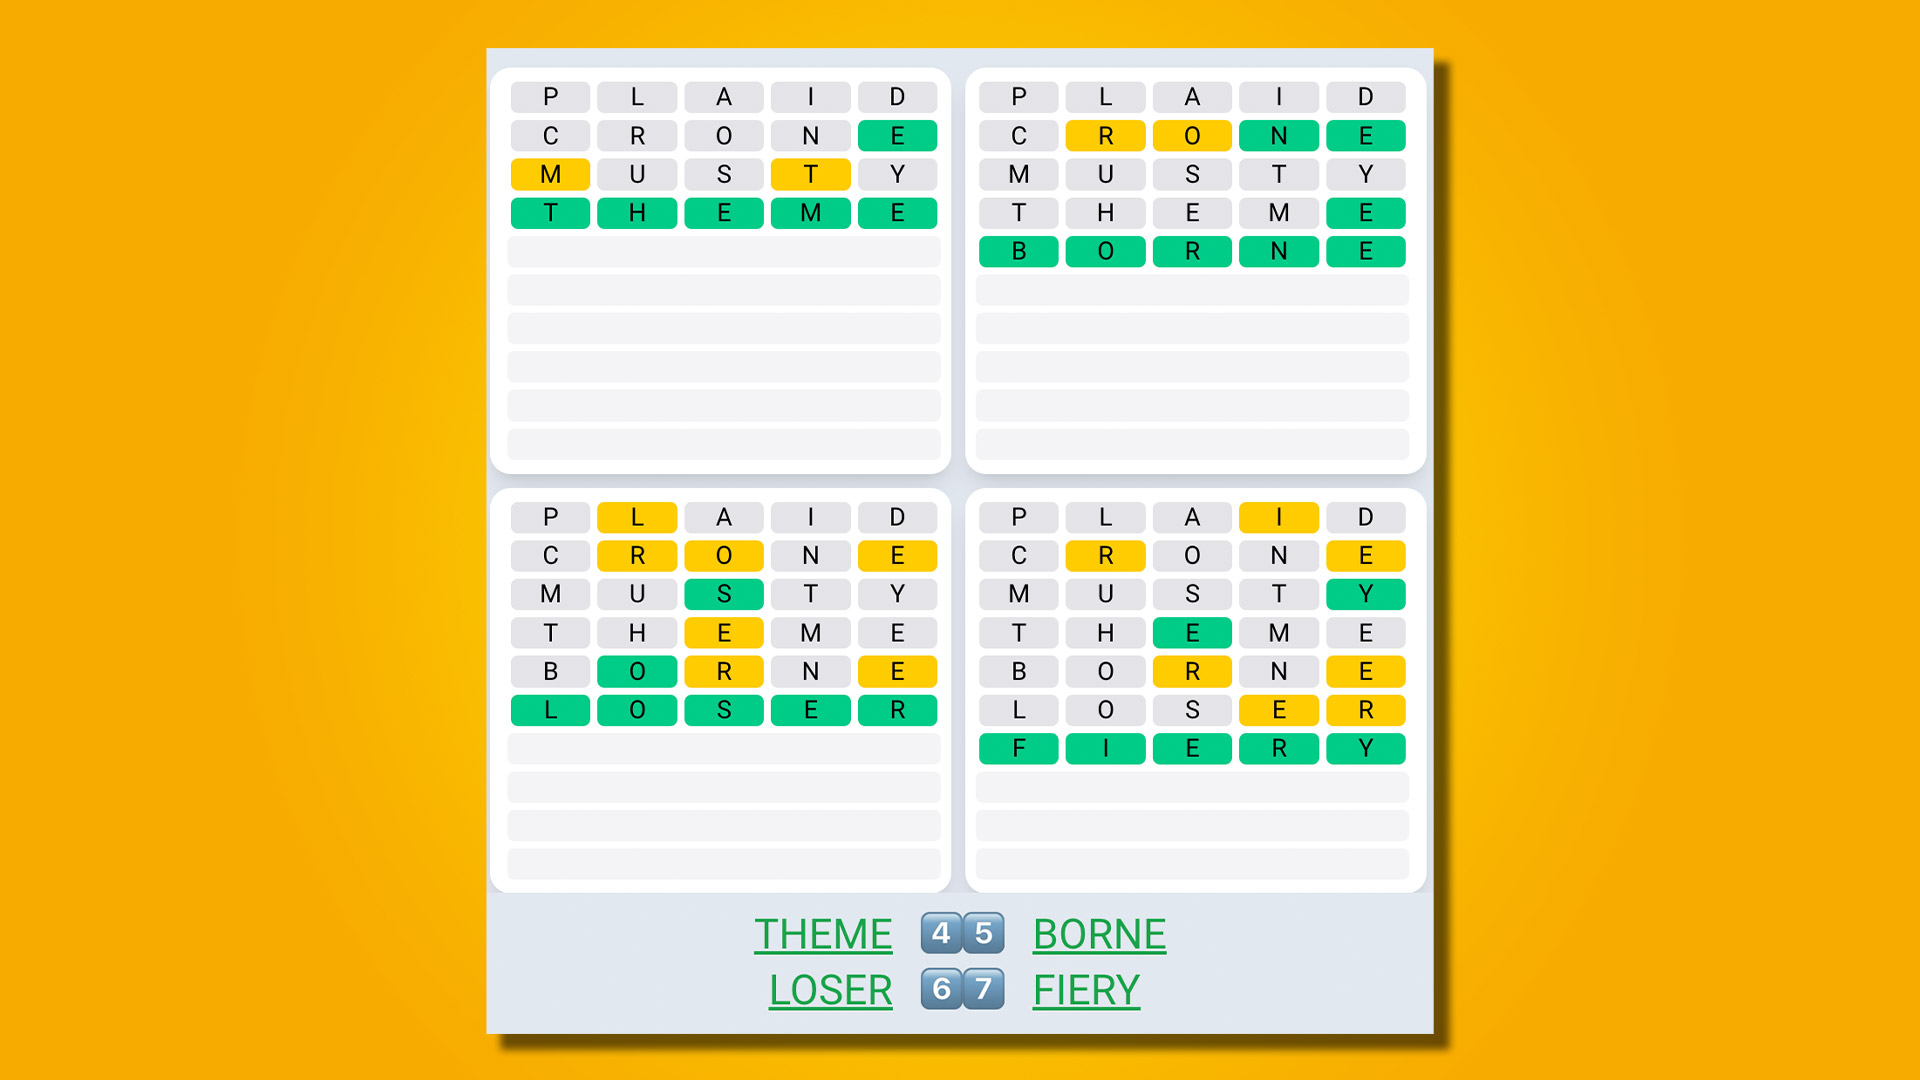 Quordle Daily Sequence answers for game 513 on a yellow background